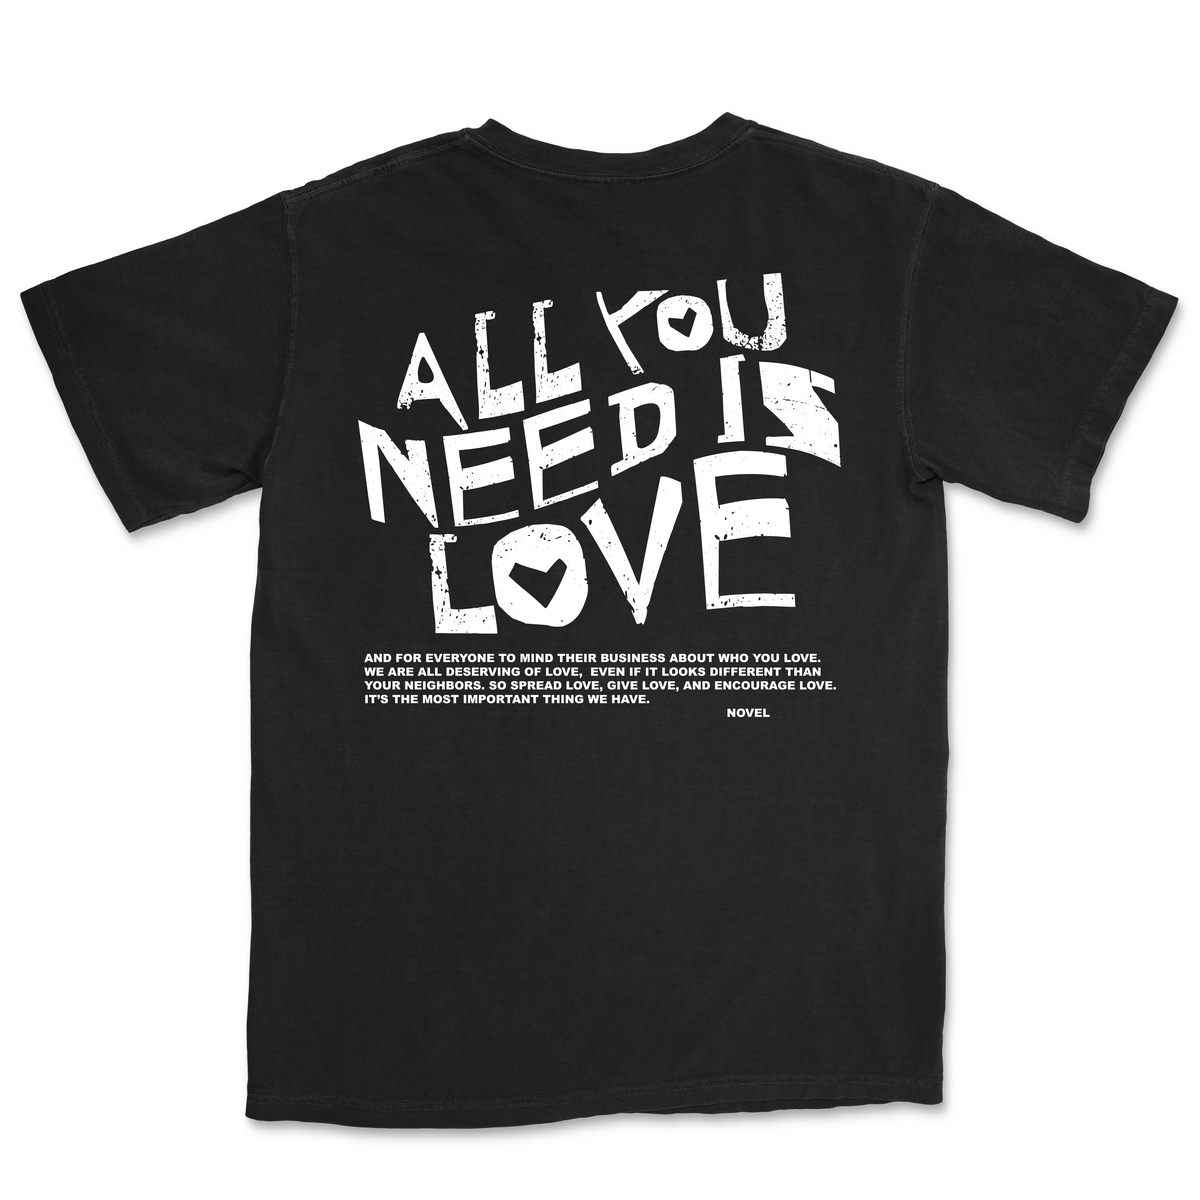 ALL YOU NEED IS LOVE (Tee) - Black